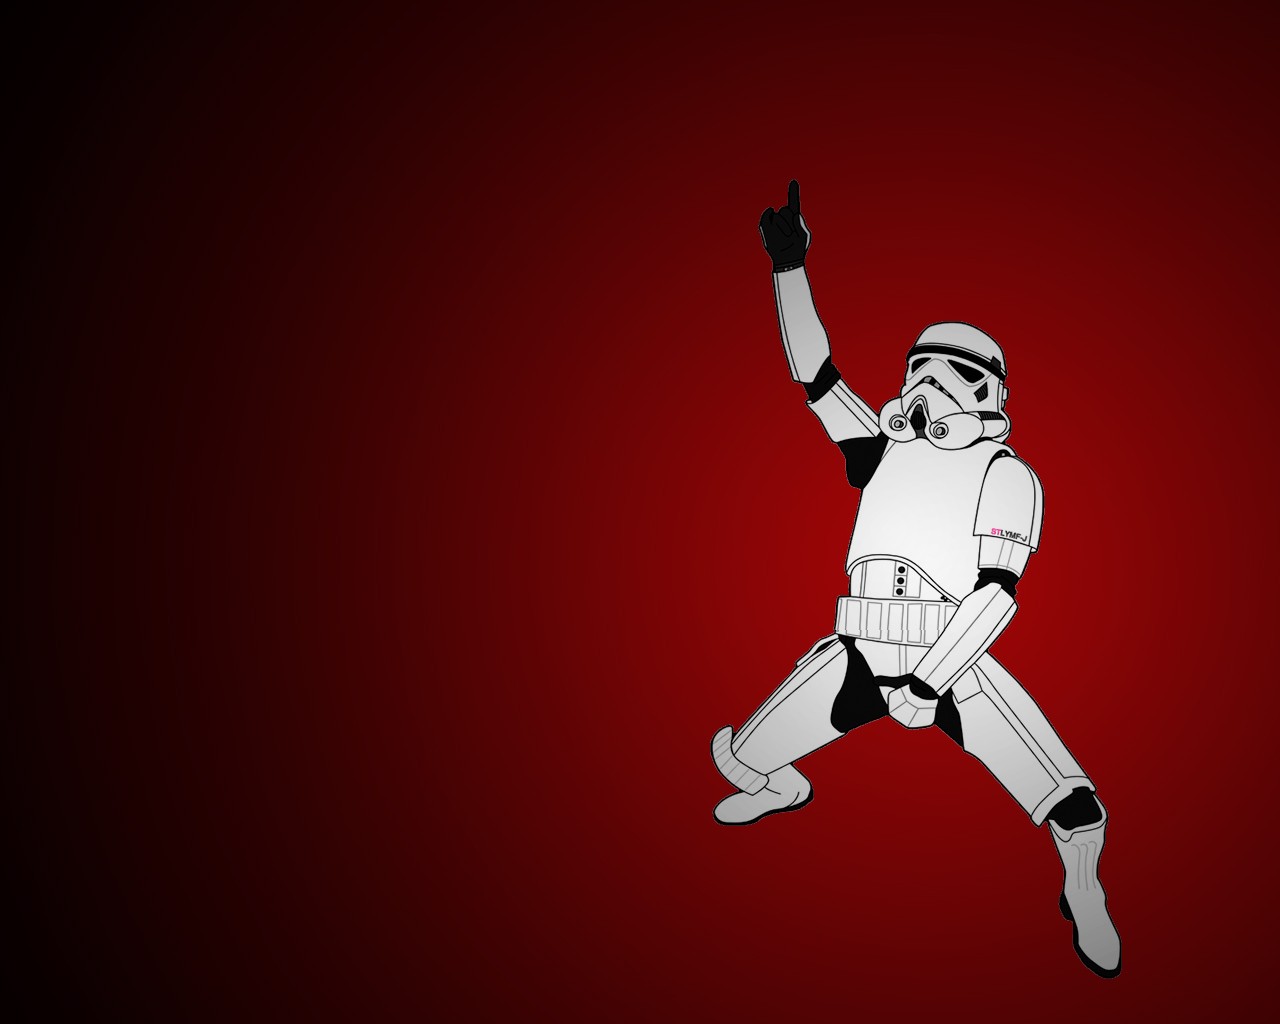 General 1280x1024 Star Wars artwork simple background red background digital art red Imperial Stormtrooper stormtrooper Star Wars Humor science fiction Imperial Forces